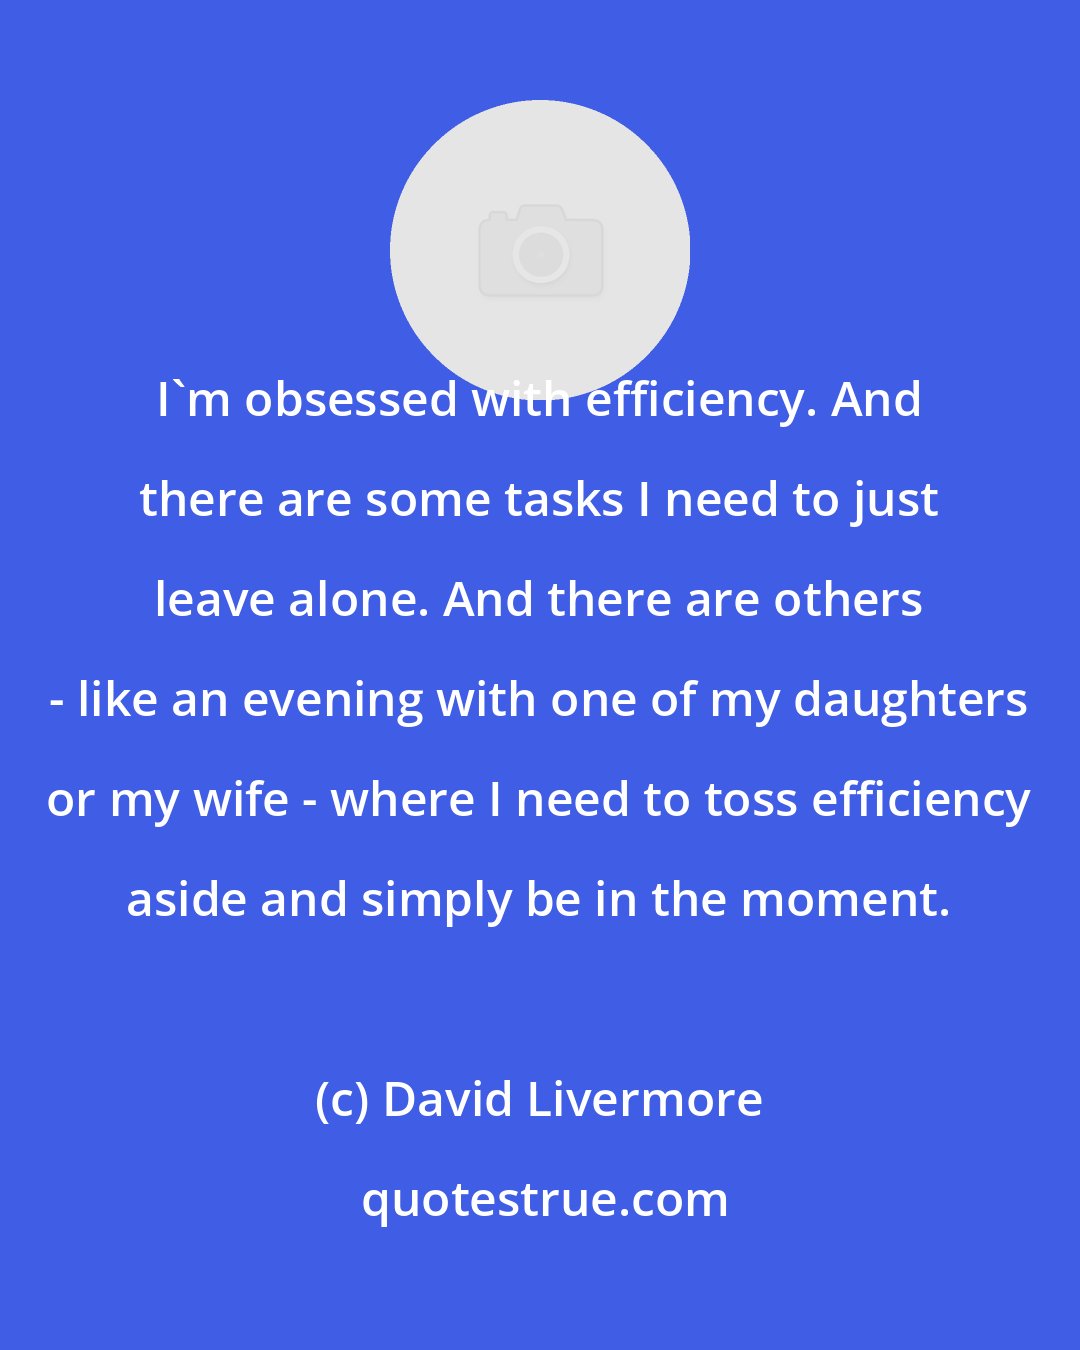 David Livermore: I'm obsessed with efficiency. And there are some tasks I need to just leave alone. And there are others - like an evening with one of my daughters or my wife - where I need to toss efficiency aside and simply be in the moment.